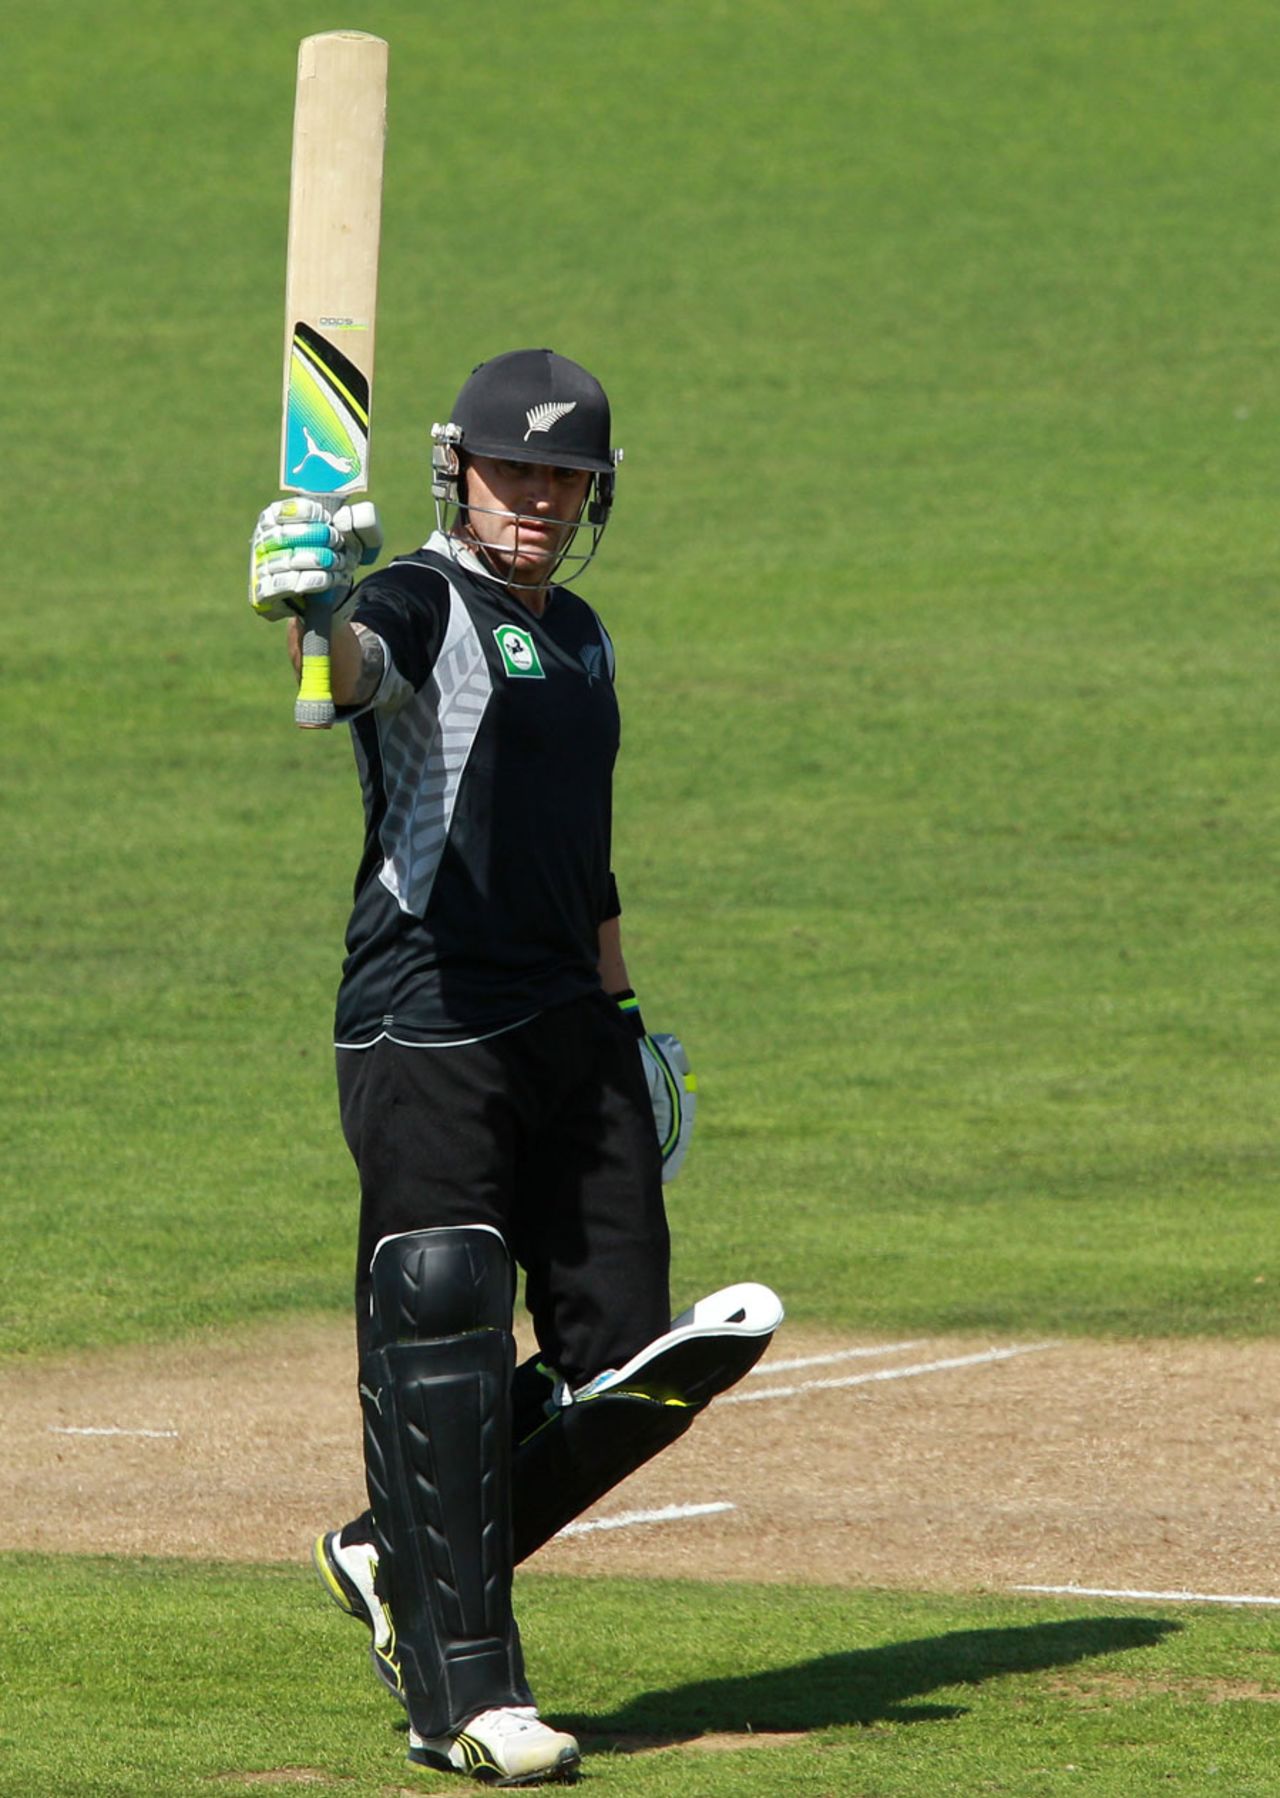 Brendon McCullum raises his bat after reaching his half-century, New Zealand v South Africa, 2nd ODI, Napier, February 29, 2012 